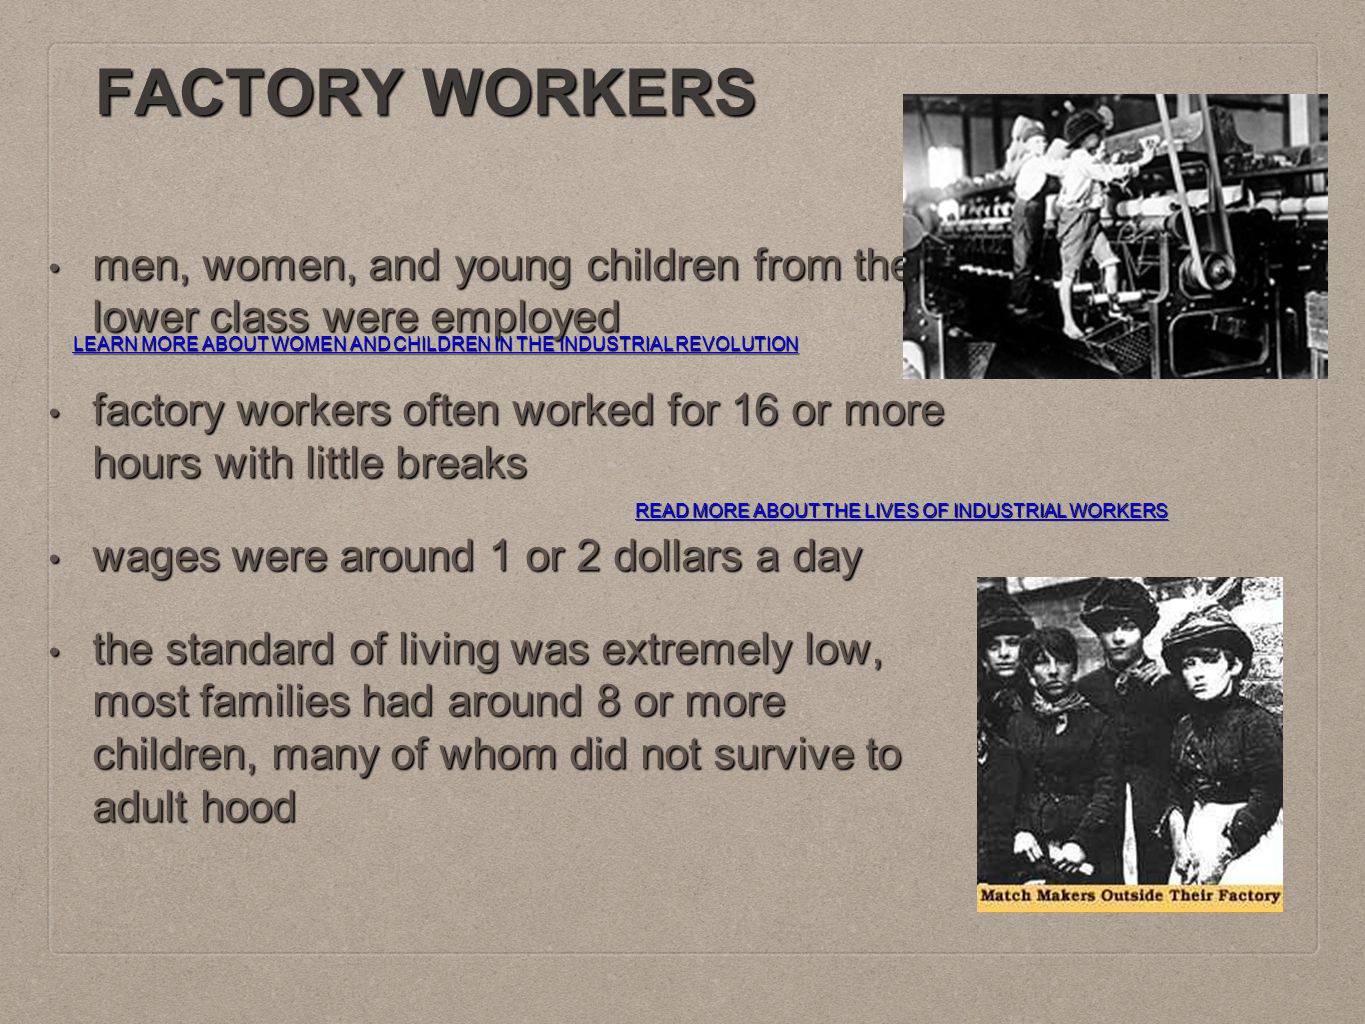 FACTORY WORKERS men, women, and young children from the lower class were employed men, women, and young children from the lower class were employed factory workers often worked for 16 or more hours with little breaks factory workers often worked for 16 or more hours with little breaks wages were around 1 or 2 dollars a day wages were around 1 or 2 dollars a day the standard of living was extremely low, most families had around 8 or more children, many of whom did not survive to adult hood the standard of living was extremely low, most families had around 8 or more children, many of whom did not survive to adult hood READ MORE ABOUT THE LIVES OF INDUSTRIAL WORKERS READ MORE ABOUT THE LIVES OF INDUSTRIAL WORKERS LEARN MORE ABOUT WOMEN AND CHILDREN IN THE INDUSTRIAL REVOLUTION LEARN MORE ABOUT WOMEN AND CHILDREN IN THE INDUSTRIAL REVOLUTION